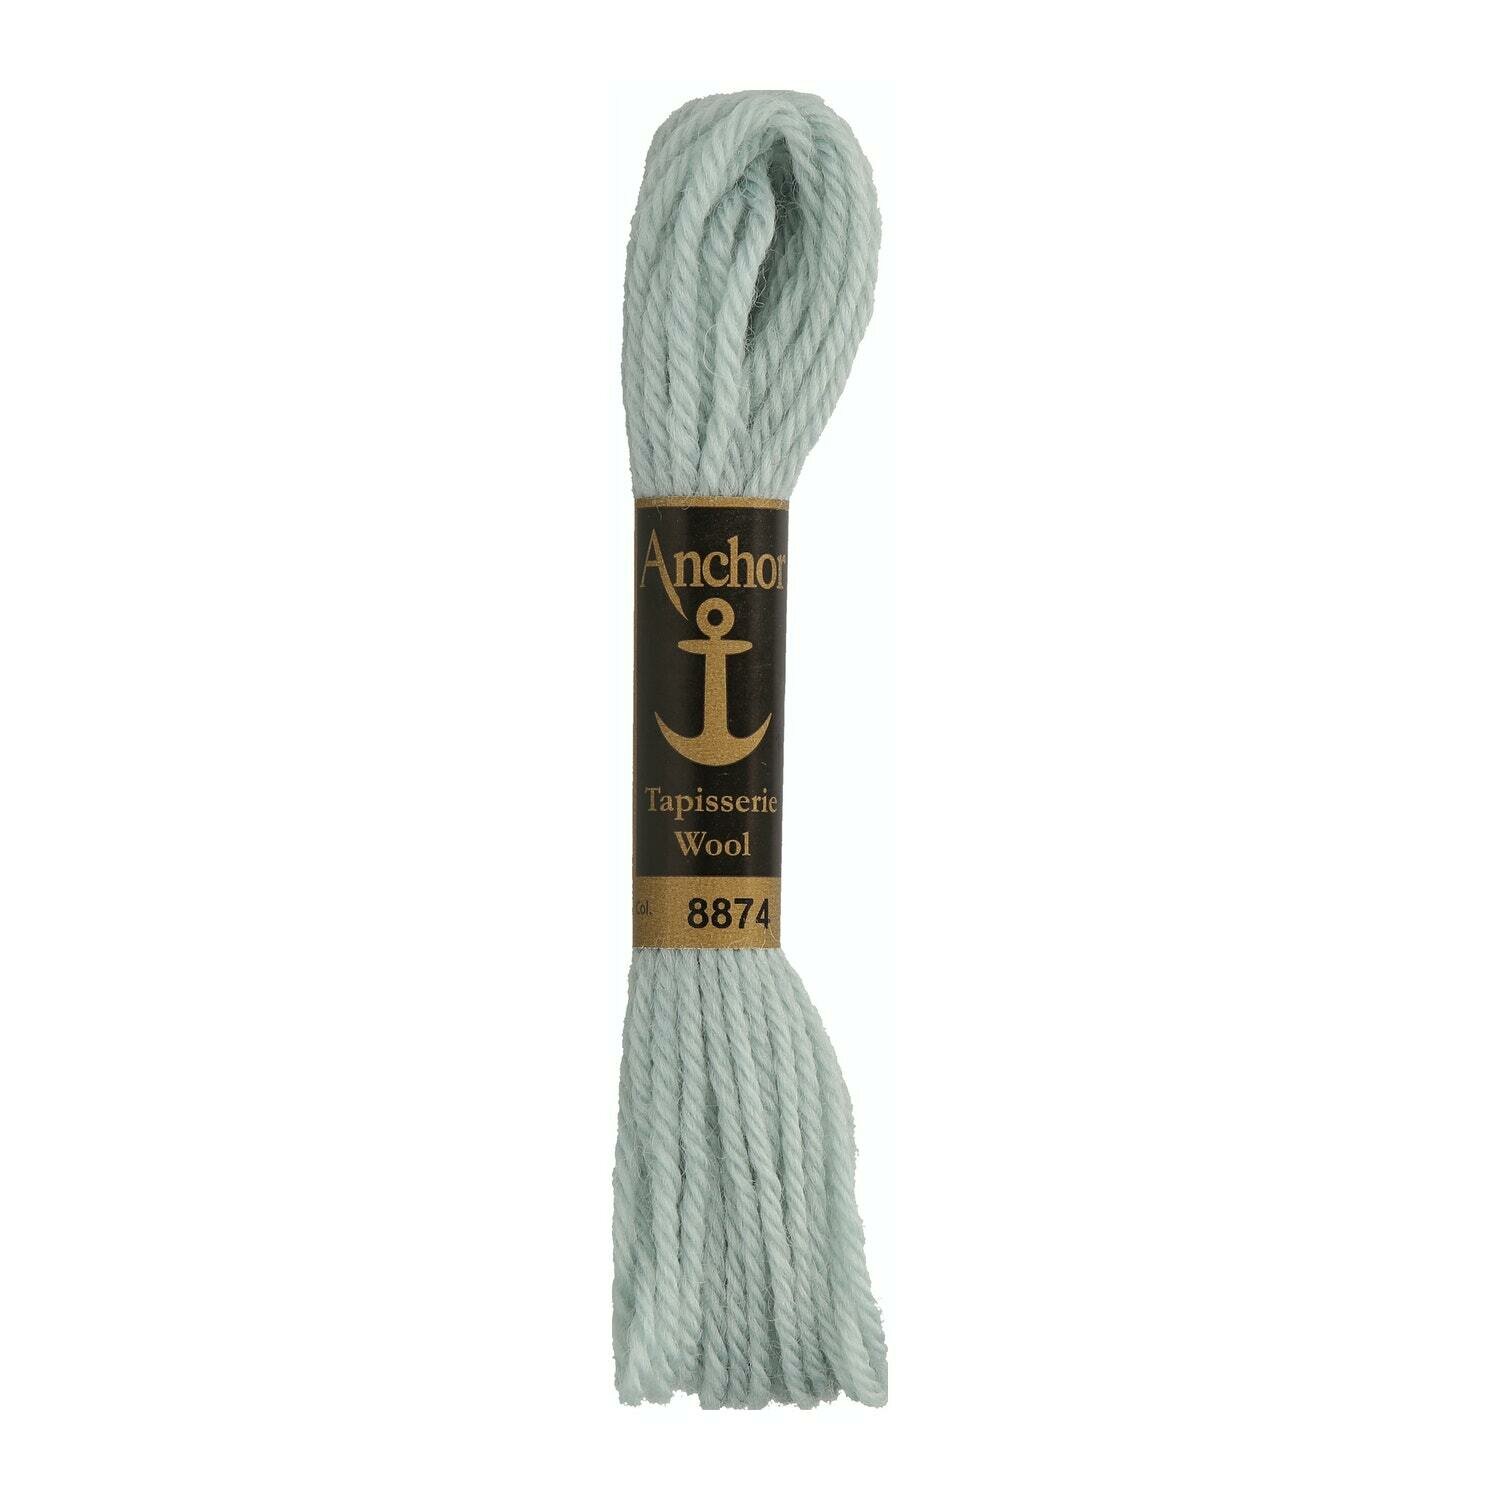 Anchor Tapisserie Wool #  08874